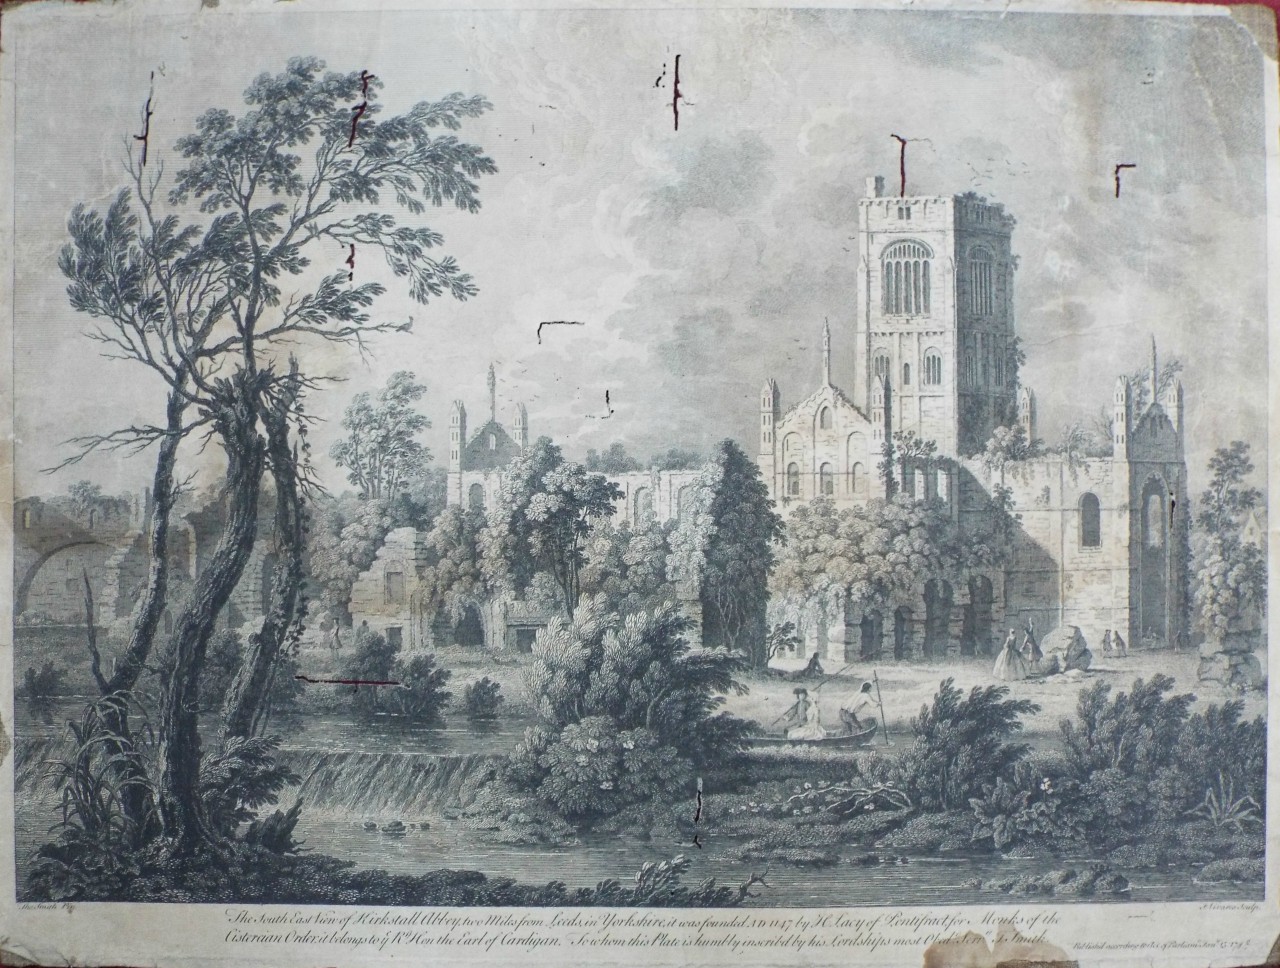 Print - The South East View of Kirkstall Abbey, two Miles from Leeds, in Yorkshire, it was founded A D 1147 by H. Lacy of Pontifract, for Monks of the Cistercian Order, it belongs to ye Rt Hon the Earl of Cardigan. To whom this Plate is humbly inscribd by his Lordship's most Obedt. Servt. T. Smith. - Vivares